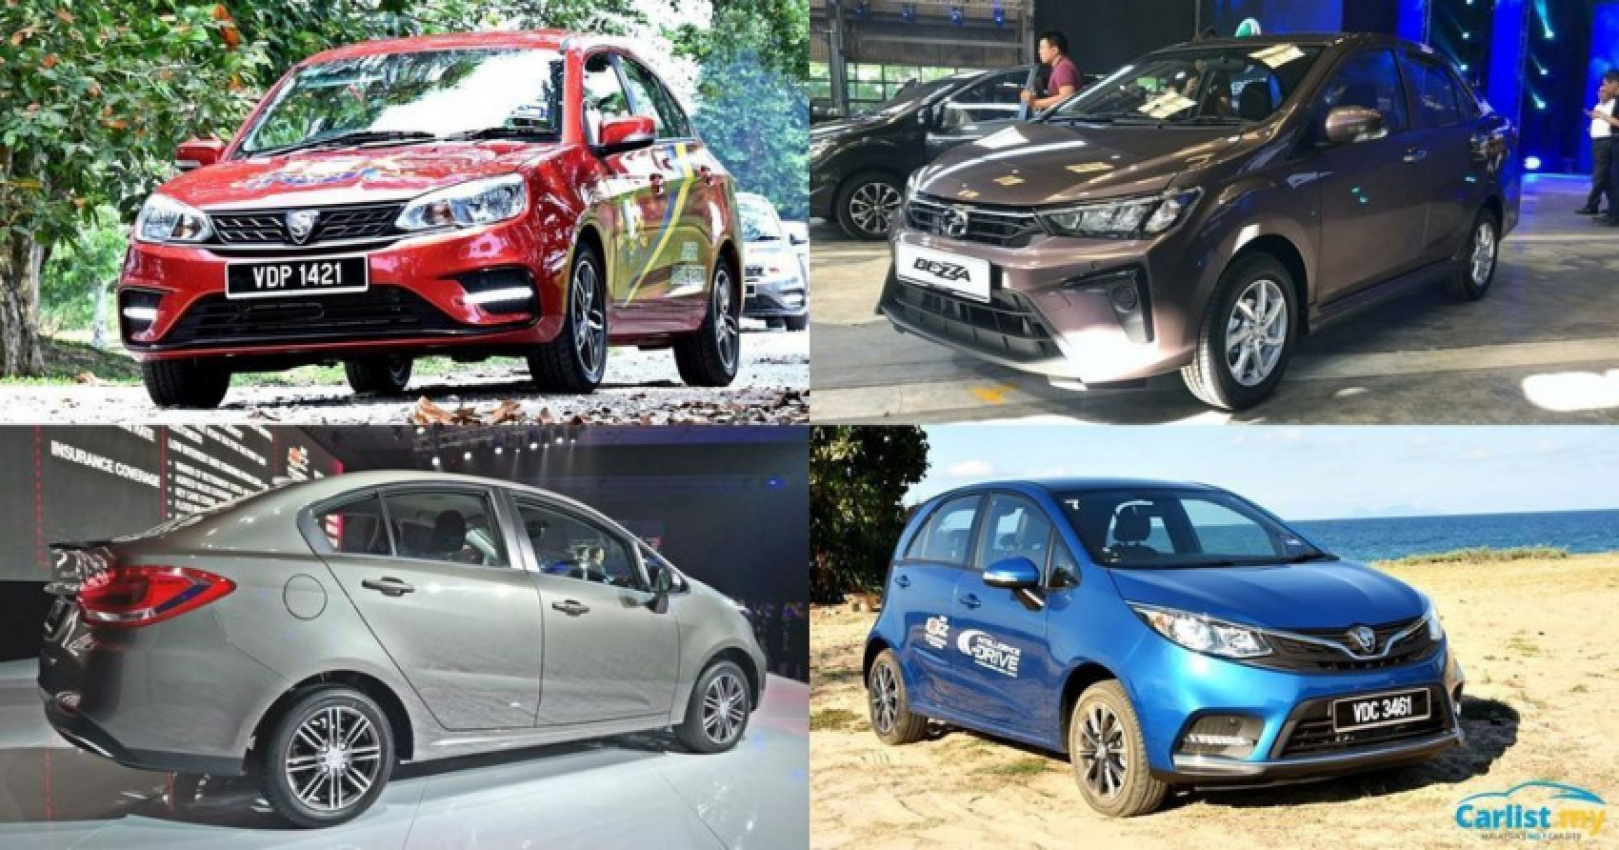 autos, cars, reviews, 5 seater, 7 seater, buying guide, insights, mpv, suv, mpv or suv? what car to buy depending on family size